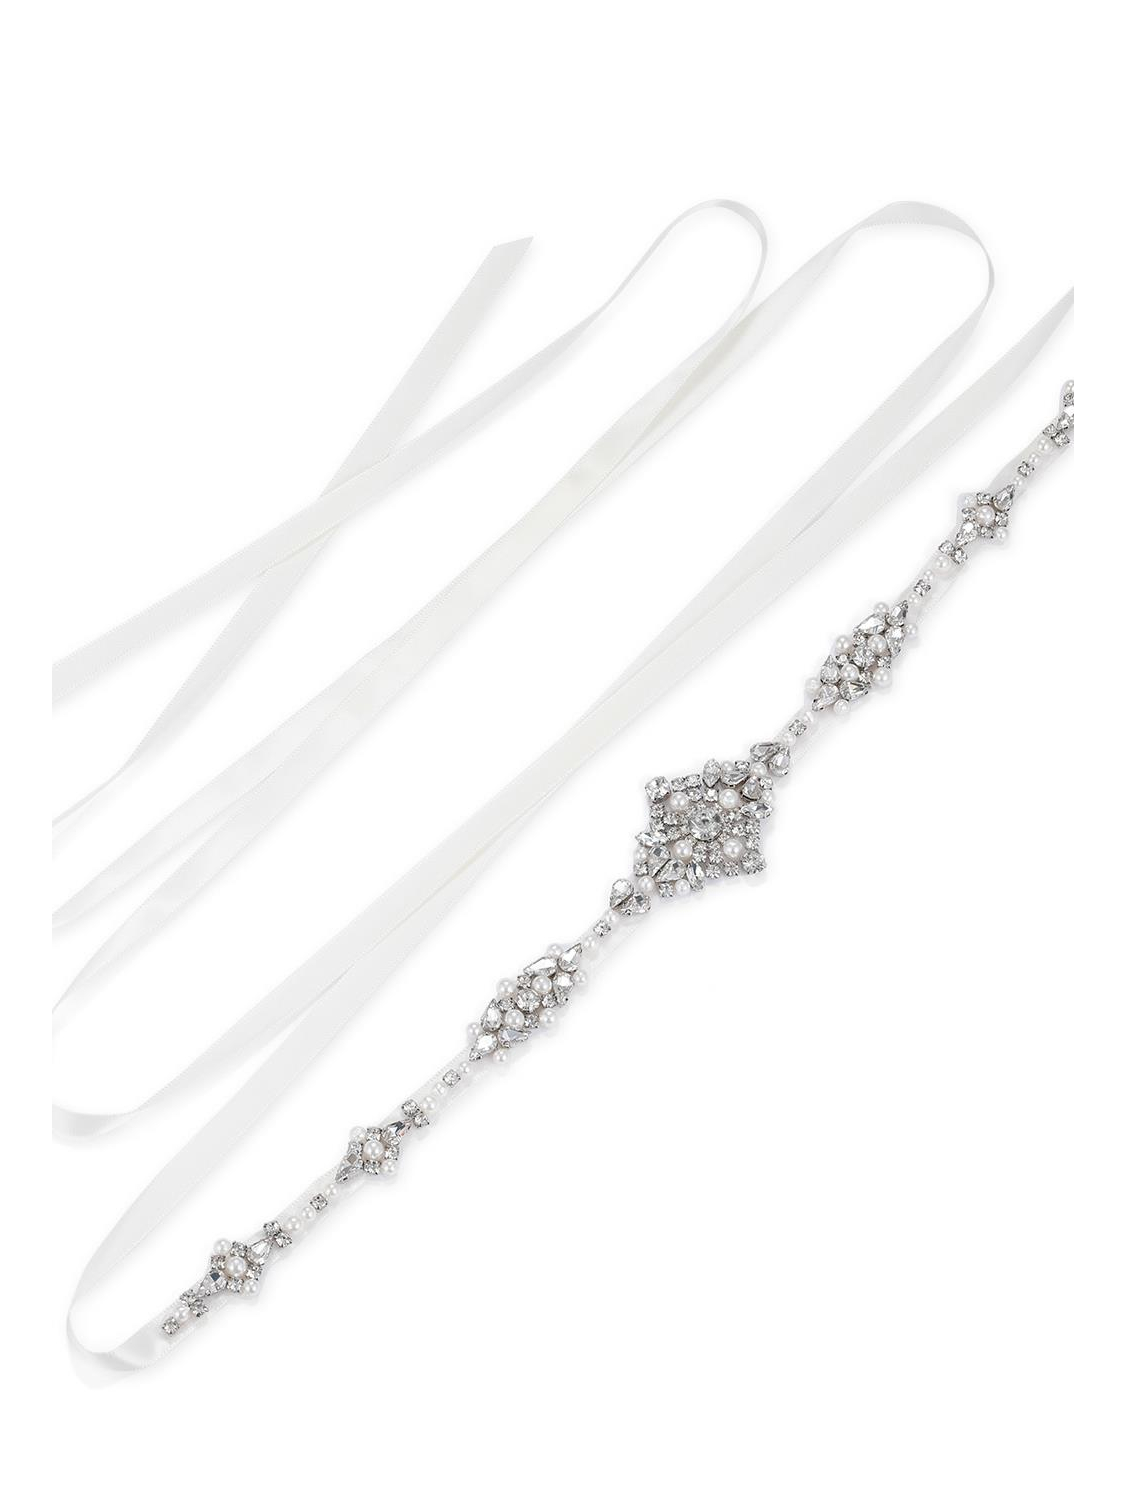 AW Bridal Sash with Pearls and Crystals, Silver Sashes & Belts, 12.99 ...